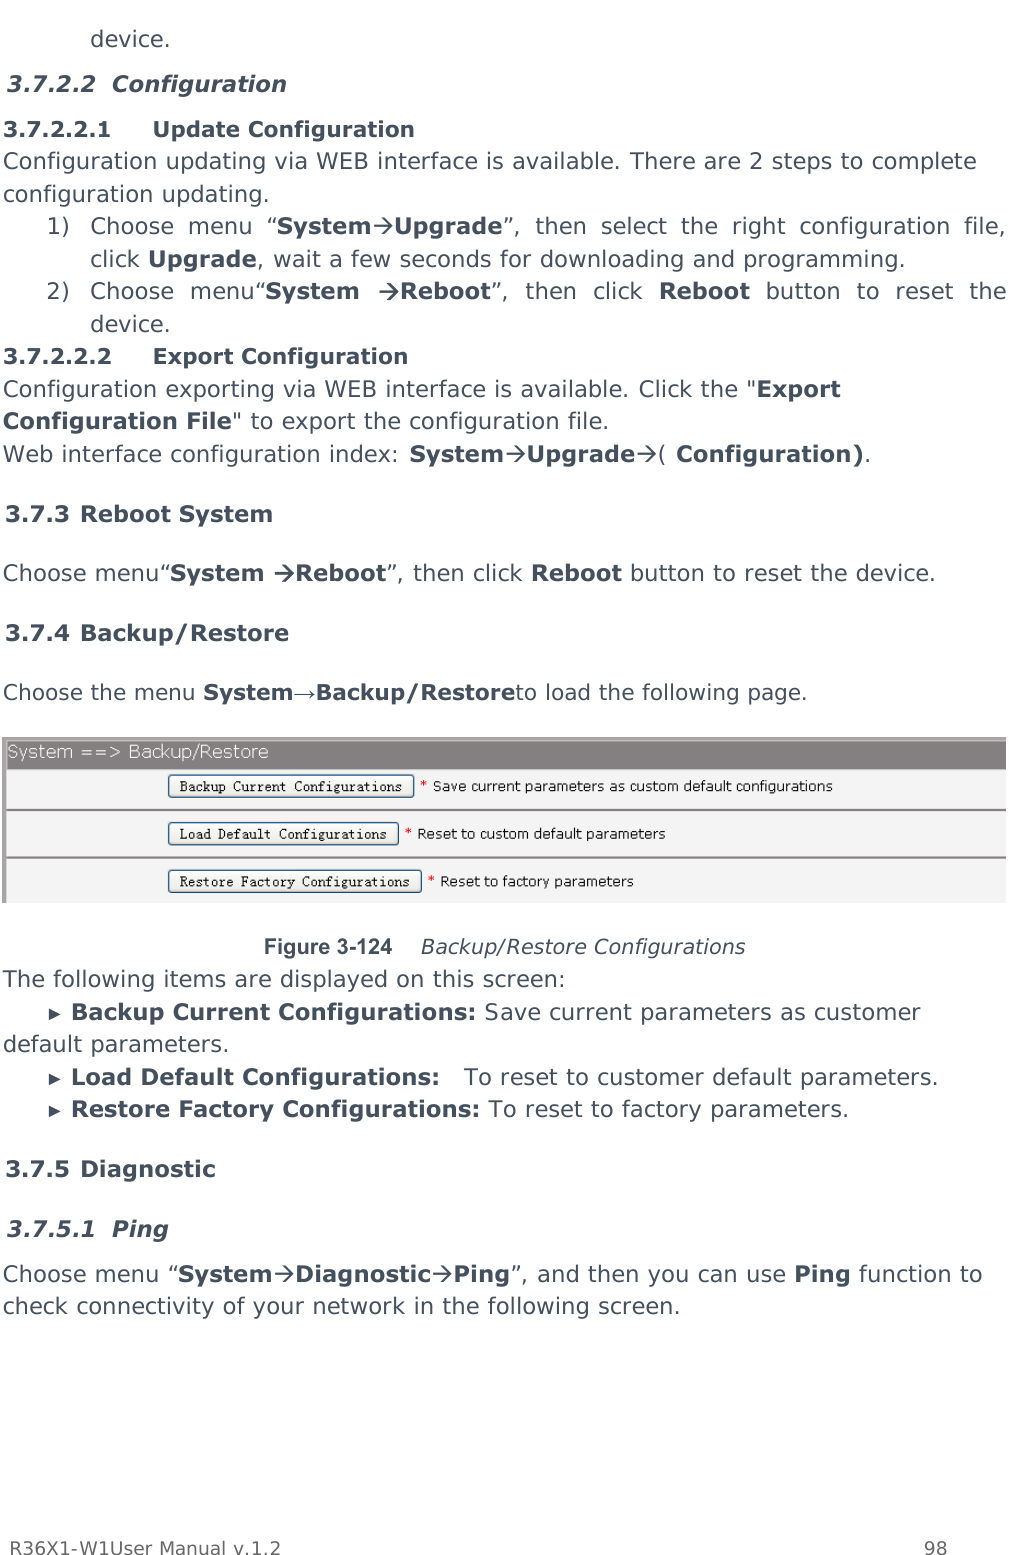           R36X1-W1User Manual v.1.2    98  device. 3.7.2.2 Configuration 3.7.2.2.1 Update Configuration Configuration updating via WEB interface is available. There are 2 steps to complete configuration updating. 1) Choose menu “SystemUpgrade”, then select the right configuration file, click Upgrade, wait a few seconds for downloading and programming. 2) Choose menu“System  Reboot”, then click Reboot button to reset the device. 3.7.2.2.2 Export Configuration Configuration exporting via WEB interface is available. Click the &quot;Export Configuration File&quot; to export the configuration file.  Web interface configuration index: SystemUpgrade( Configuration). 3.7.3 Reboot System Choose menu“System Reboot”, then click Reboot button to reset the device. 3.7.4 Backup/Restore Choose the menu System→Backup/Restoreto load the following page.  Figure 3-124   Backup/Restore Configurations The following items are displayed on this screen: ► Backup Current Configurations: Save current parameters as customer default parameters. ► Load Default Configurations:   To reset to customer default parameters. ► Restore Factory Configurations: To reset to factory parameters. 3.7.5 Diagnostic 3.7.5.1 Ping Choose menu “SystemDiagnosticPing”, and then you can use Ping function to check connectivity of your network in the following screen. 